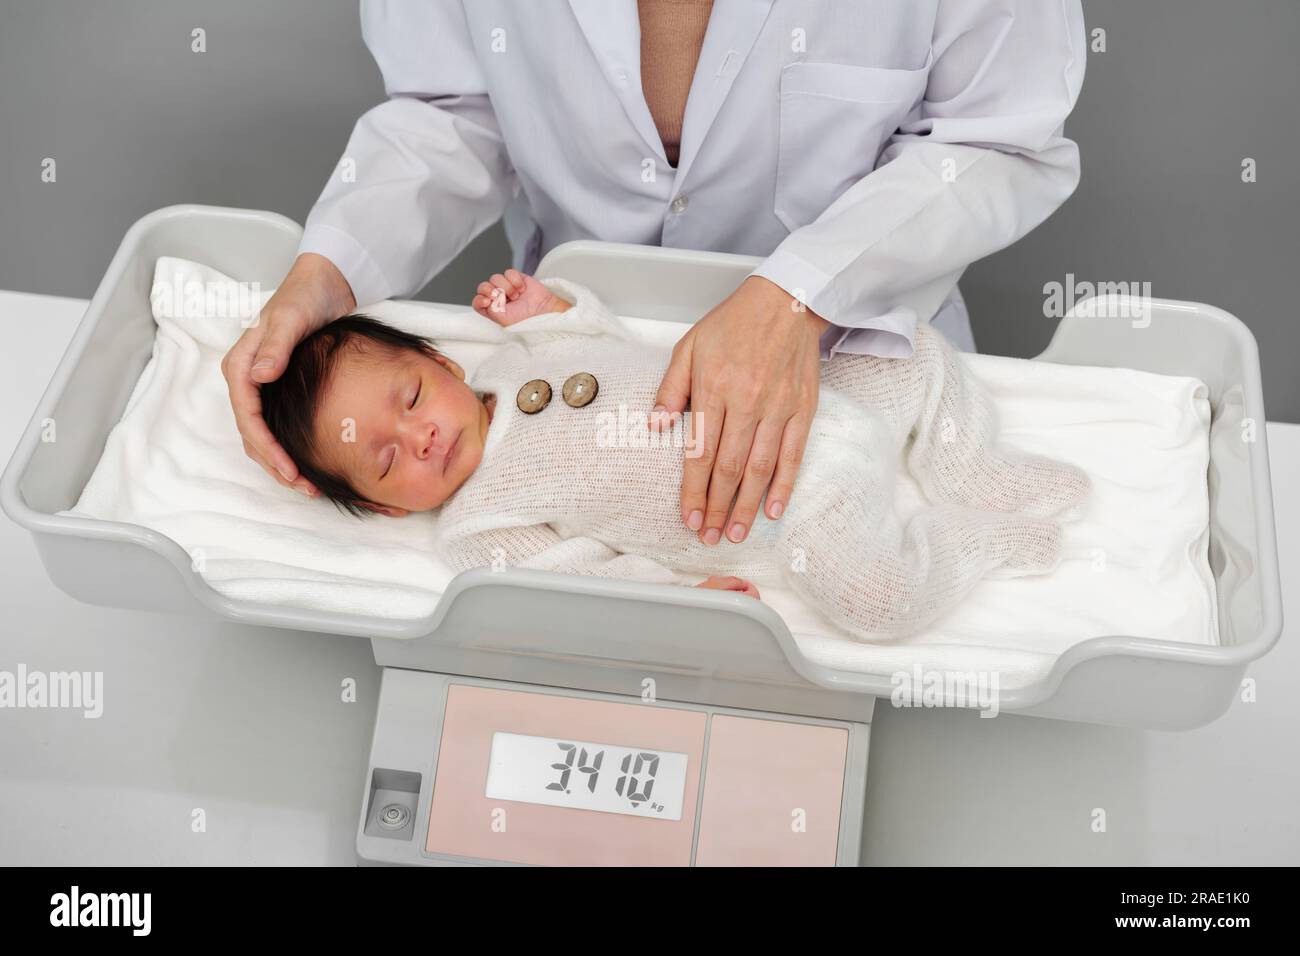 https://c8.alamy.com/comp/2RAE1K0/newborn-baby-weight-measurement-on-the-digital-scales-with-doctor-in-hospital-2RAE1K0.jpg